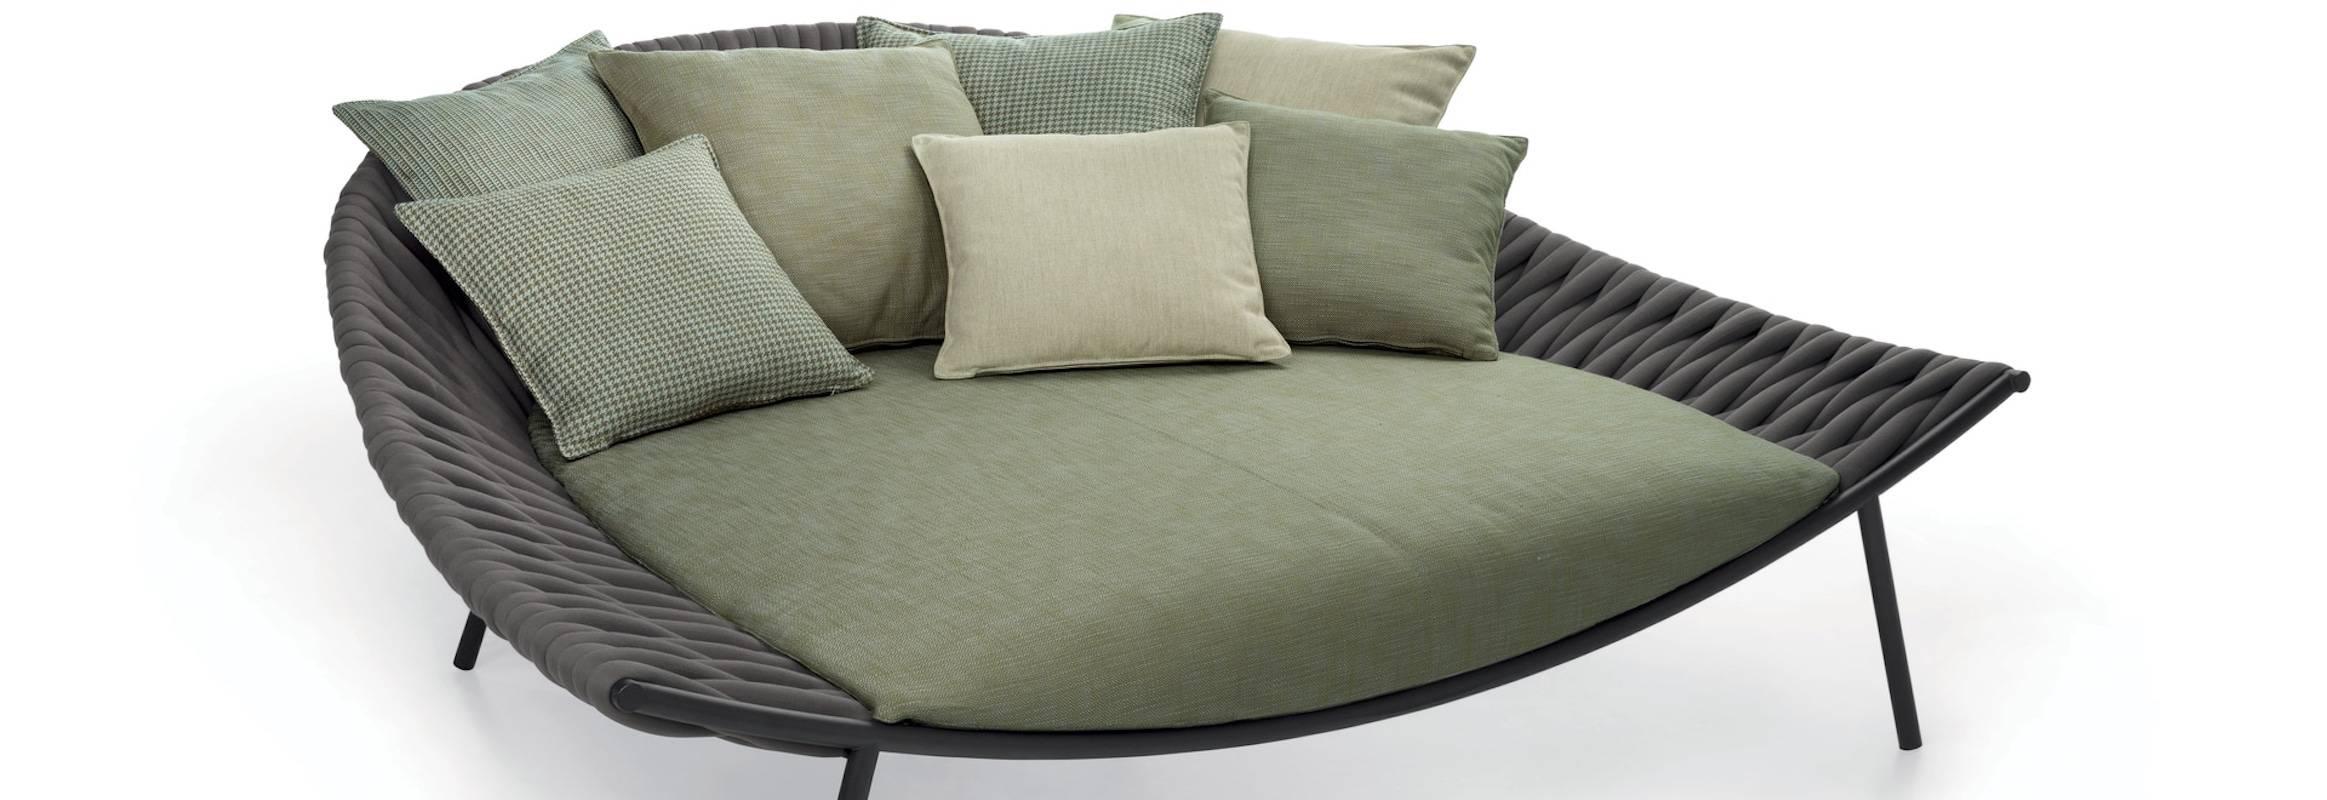 Contemporary Roda Arena Daybed or Lounge for Outdoors For Sale